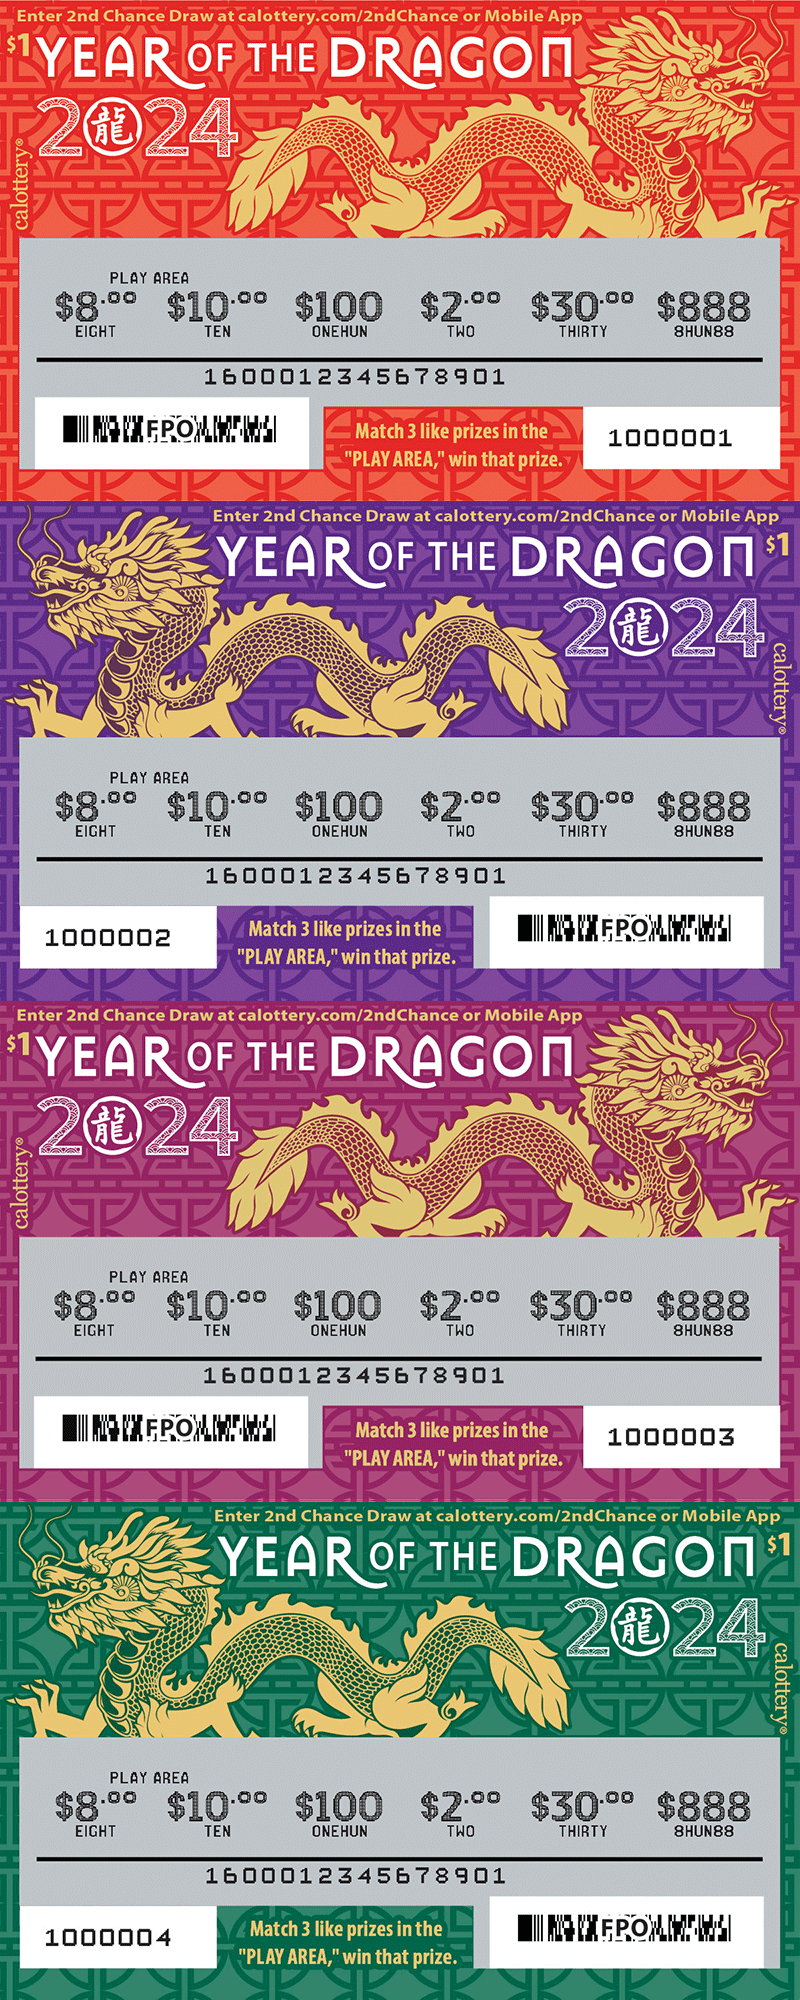 1600 $1 year of the dragon